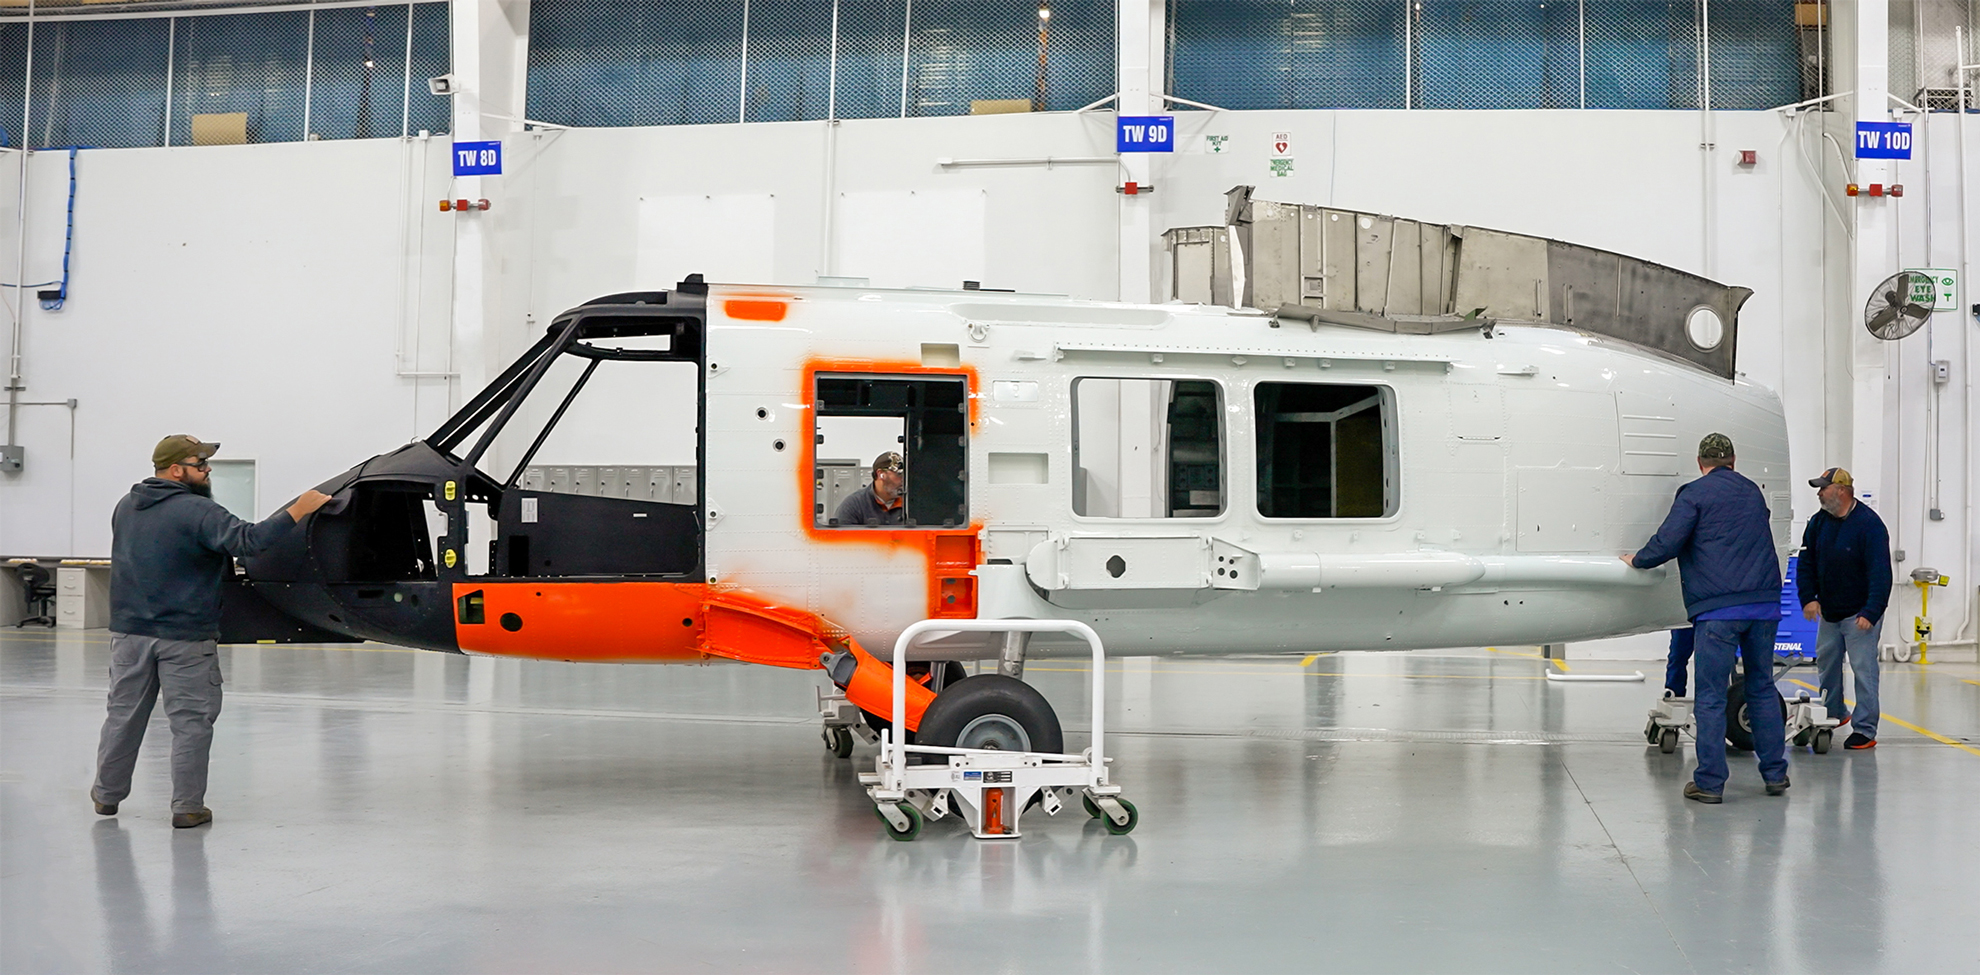 Sikorsky delivers the first MH-60T Jayhawk helicopter replacement airframe to the U.S. Coast Guard Nov. 30 as part of a service life extension program for the MH-60T fleet.